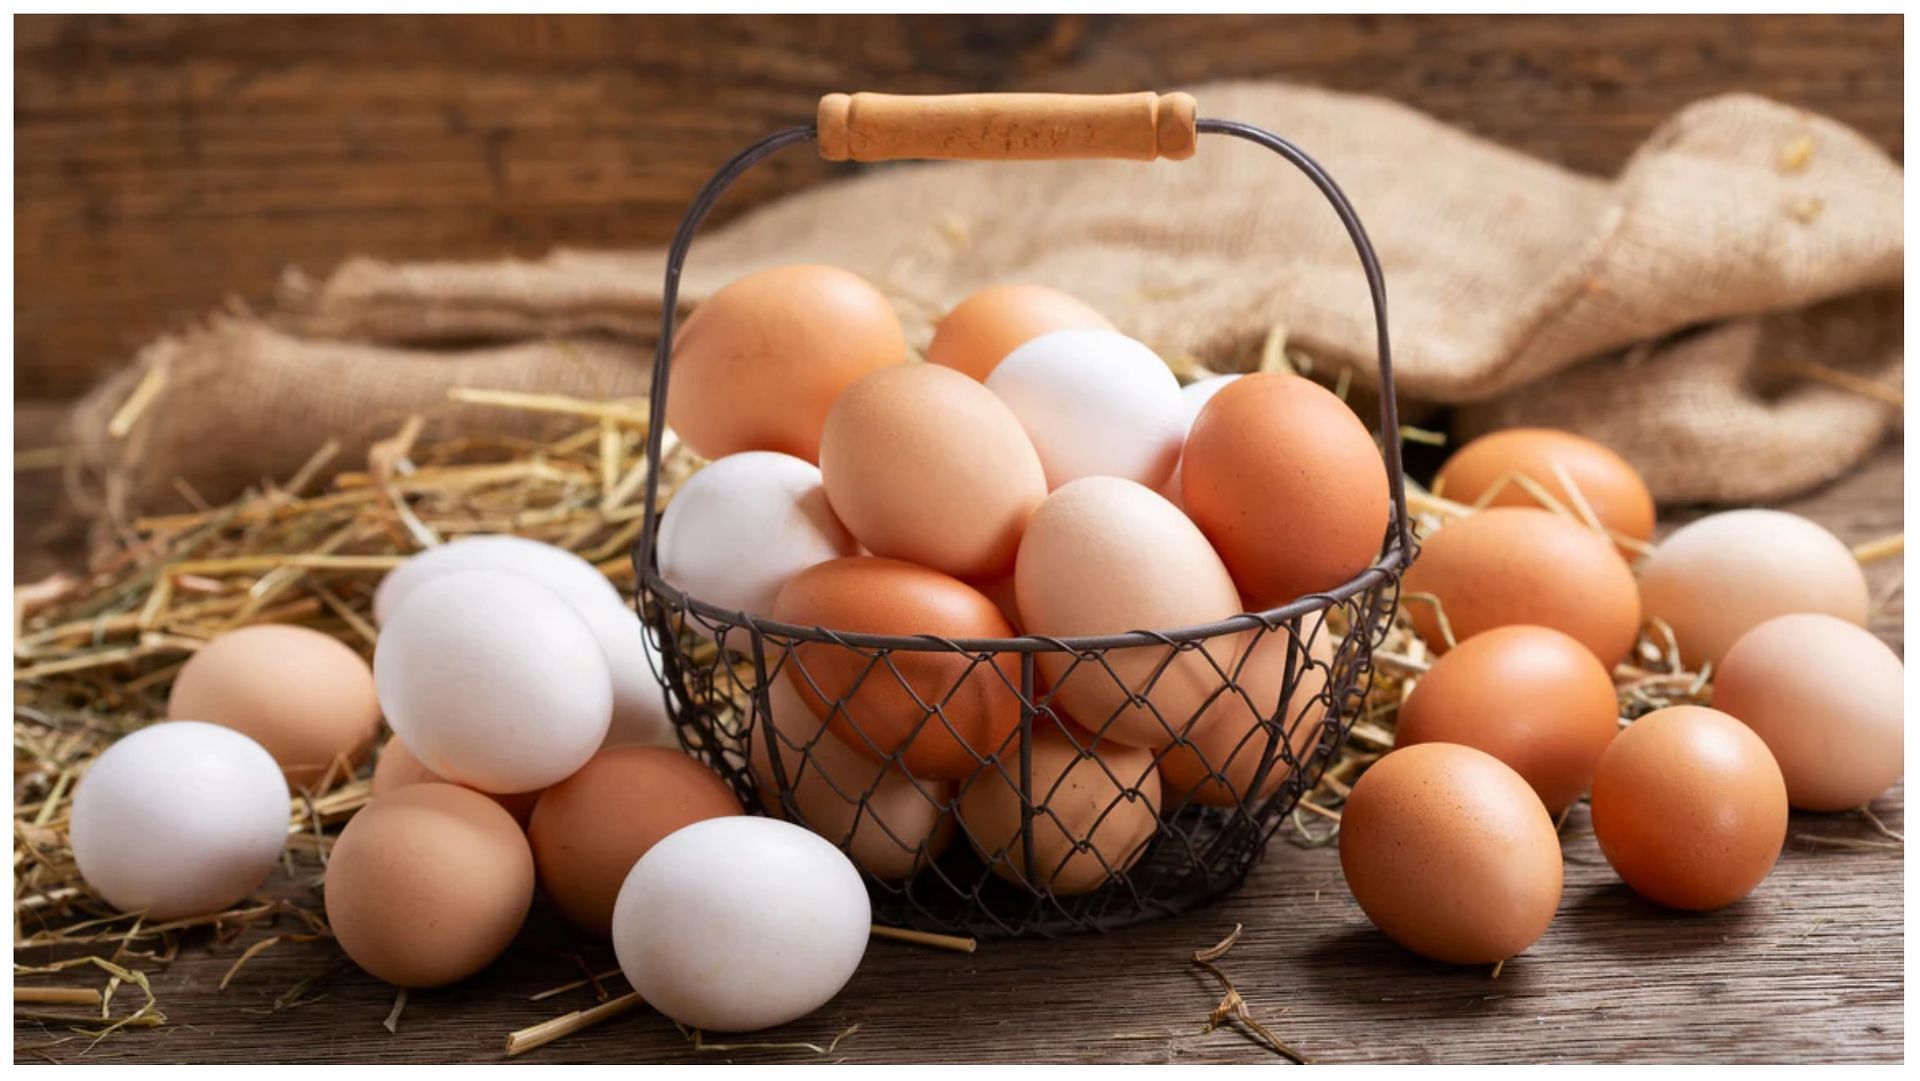 Why has the price of eggs skyrocketed? California shortage explained